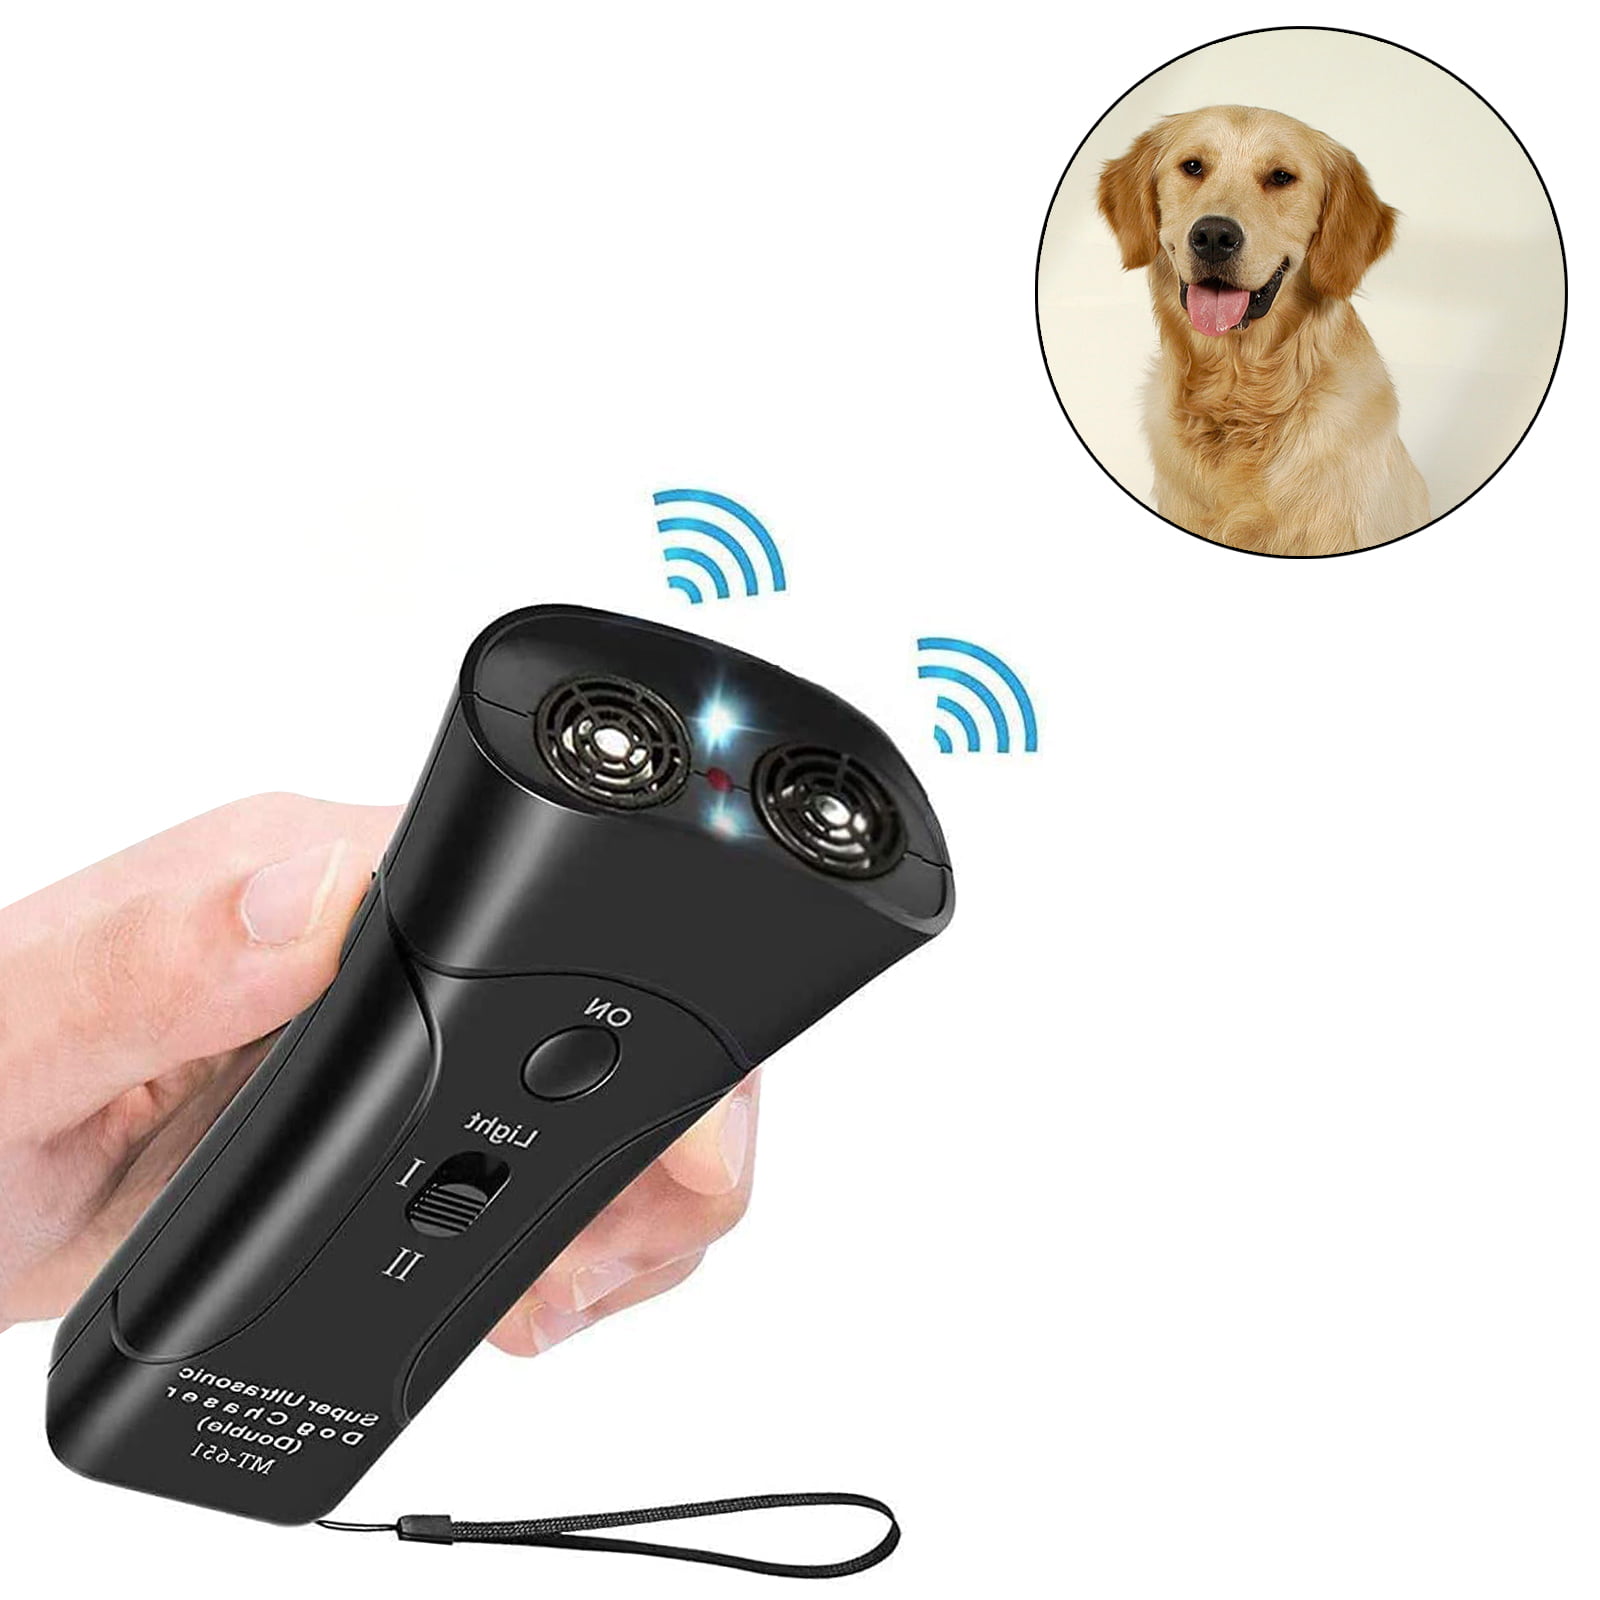 Ultrasonic Dog Barking Control Devices Pet Gentle Trainer & Clicker Anti Barking Muzzle for Barking 3 Modes LED Flash Handheld Dog Repellent 